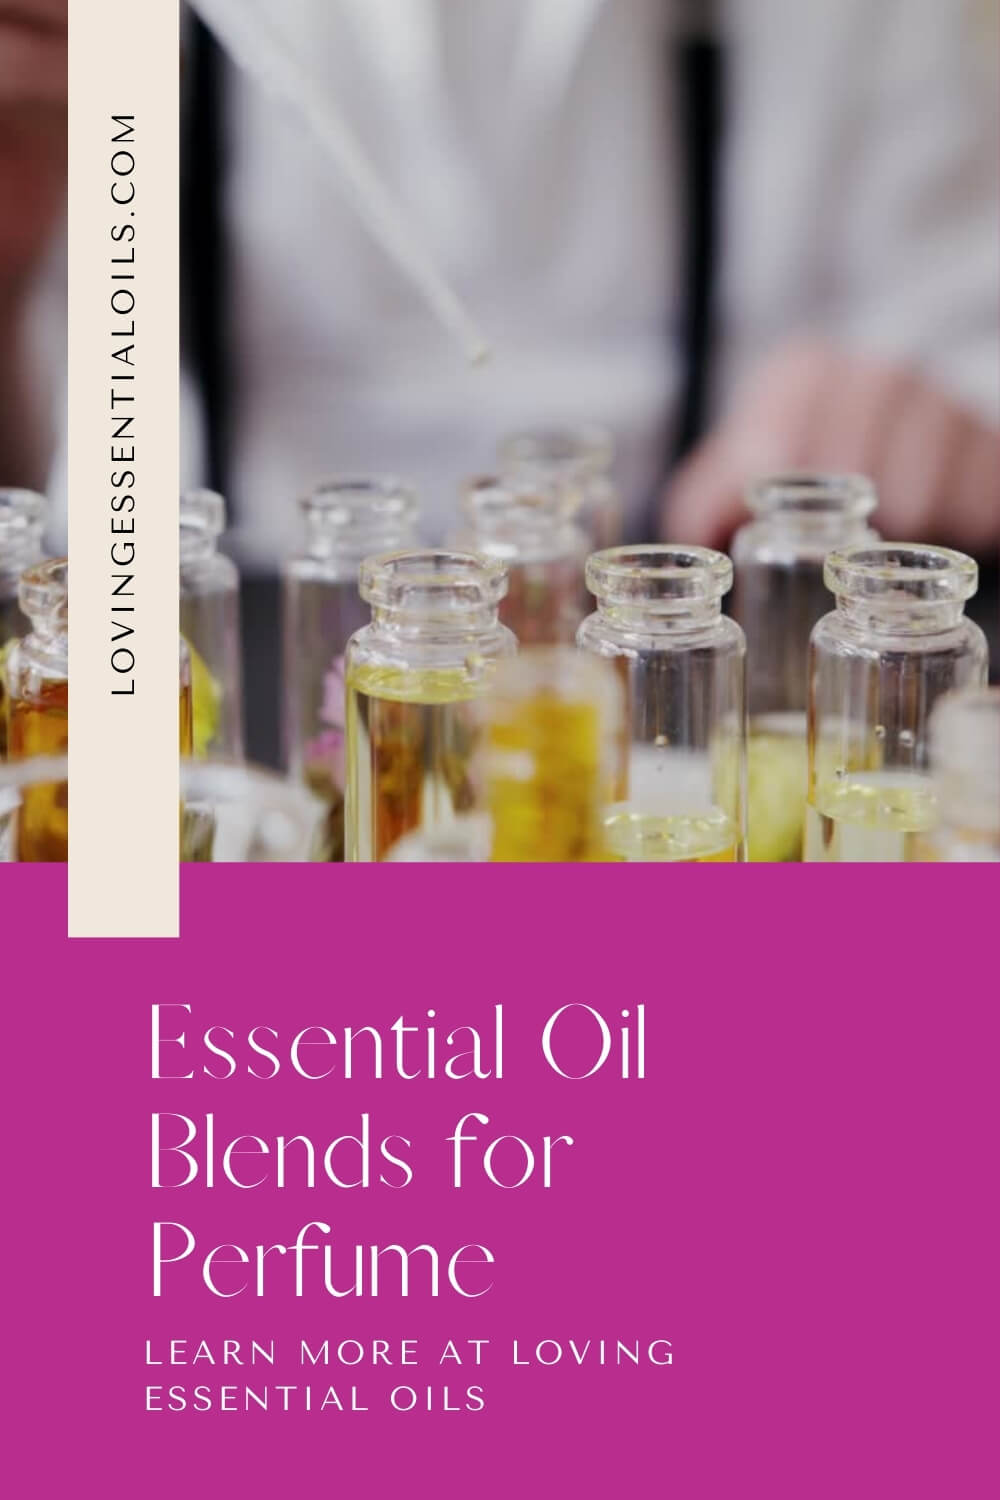 Essential Oil Blends for Perfume by Loving Essential Oils